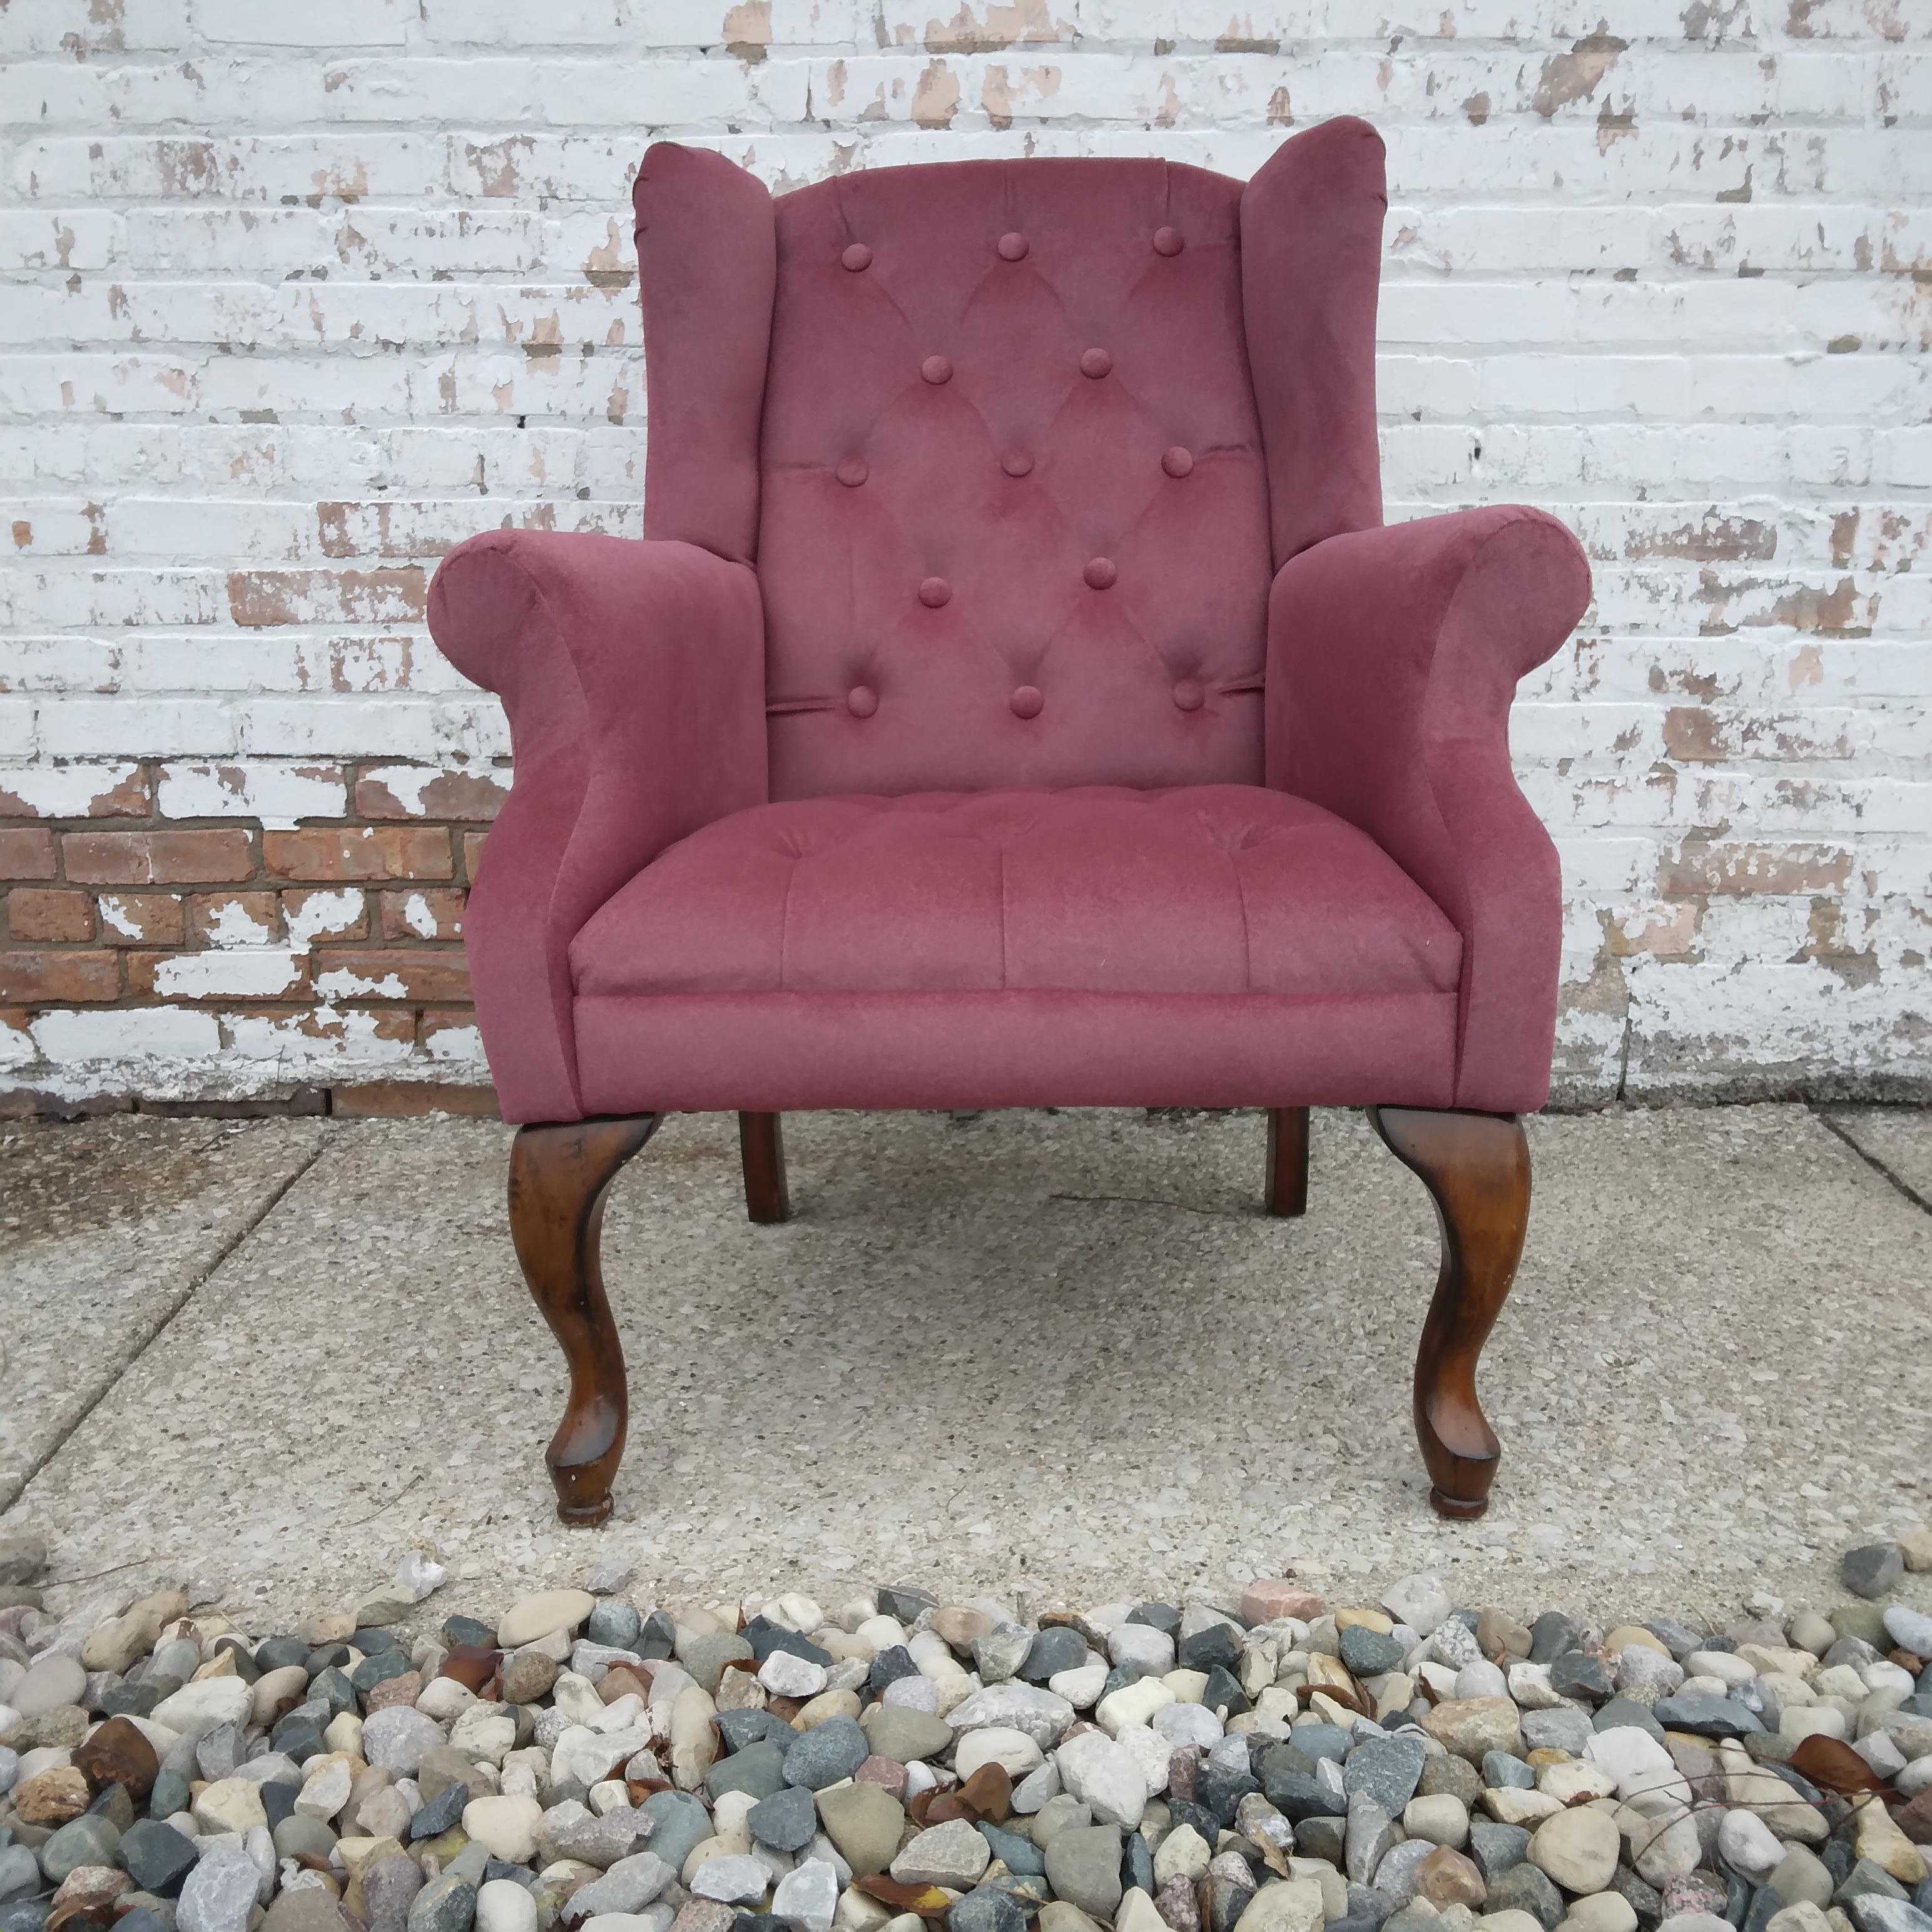 Adorable and lush, this vintage wingback chair is the perfect way to add color and style to your space! We love her plump tufting and small stature. The berry-hued chenille is incredibly soft and very durable.  Falling somewhere between dusty rose